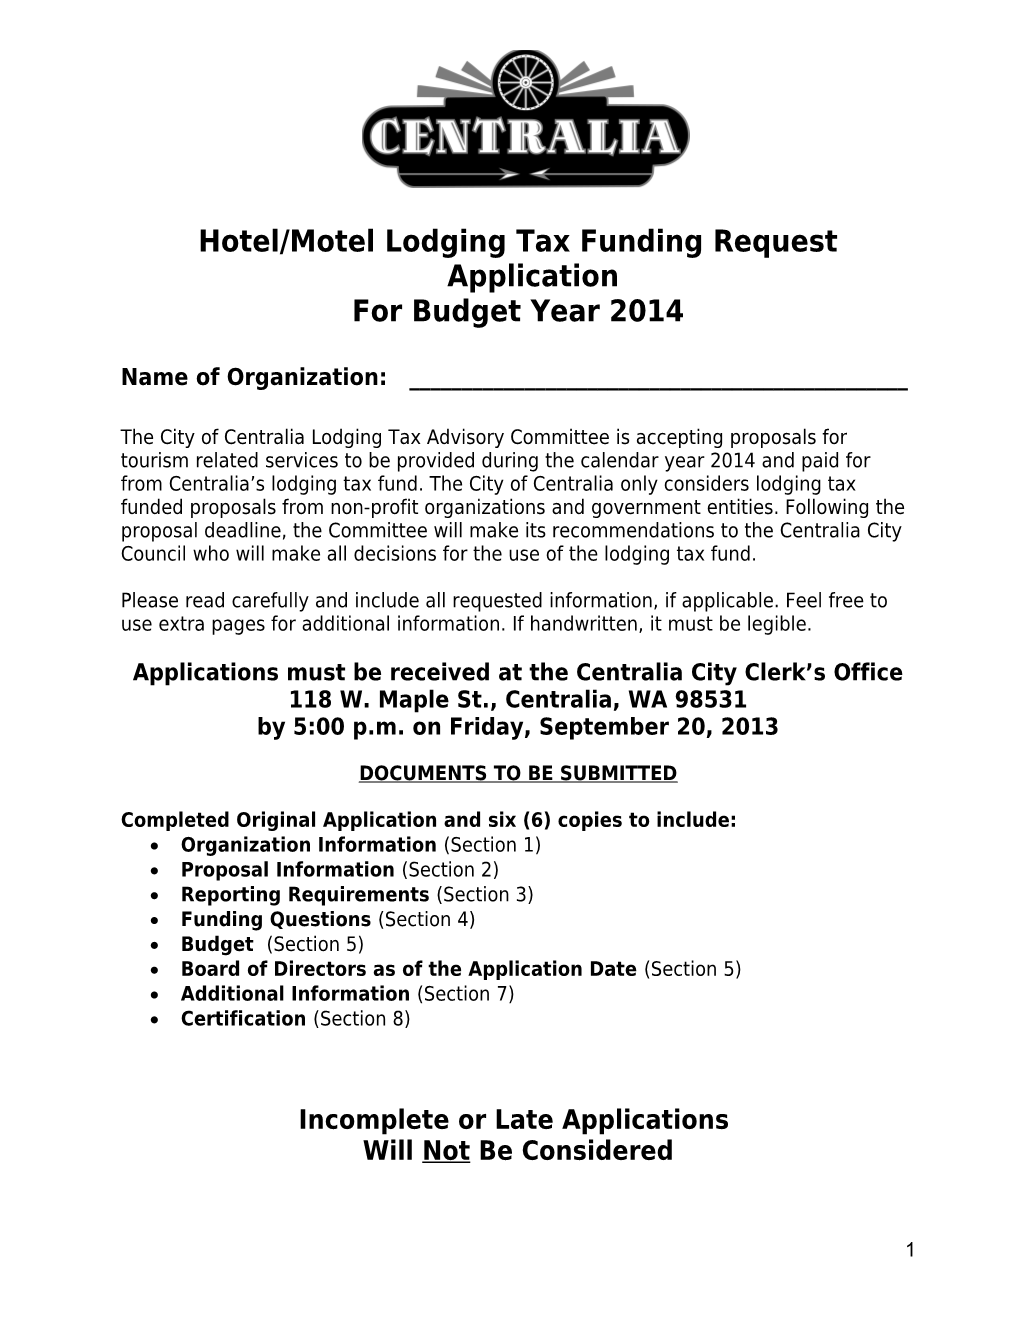 Hotel/Motel Lodging Tax Funding Request Form